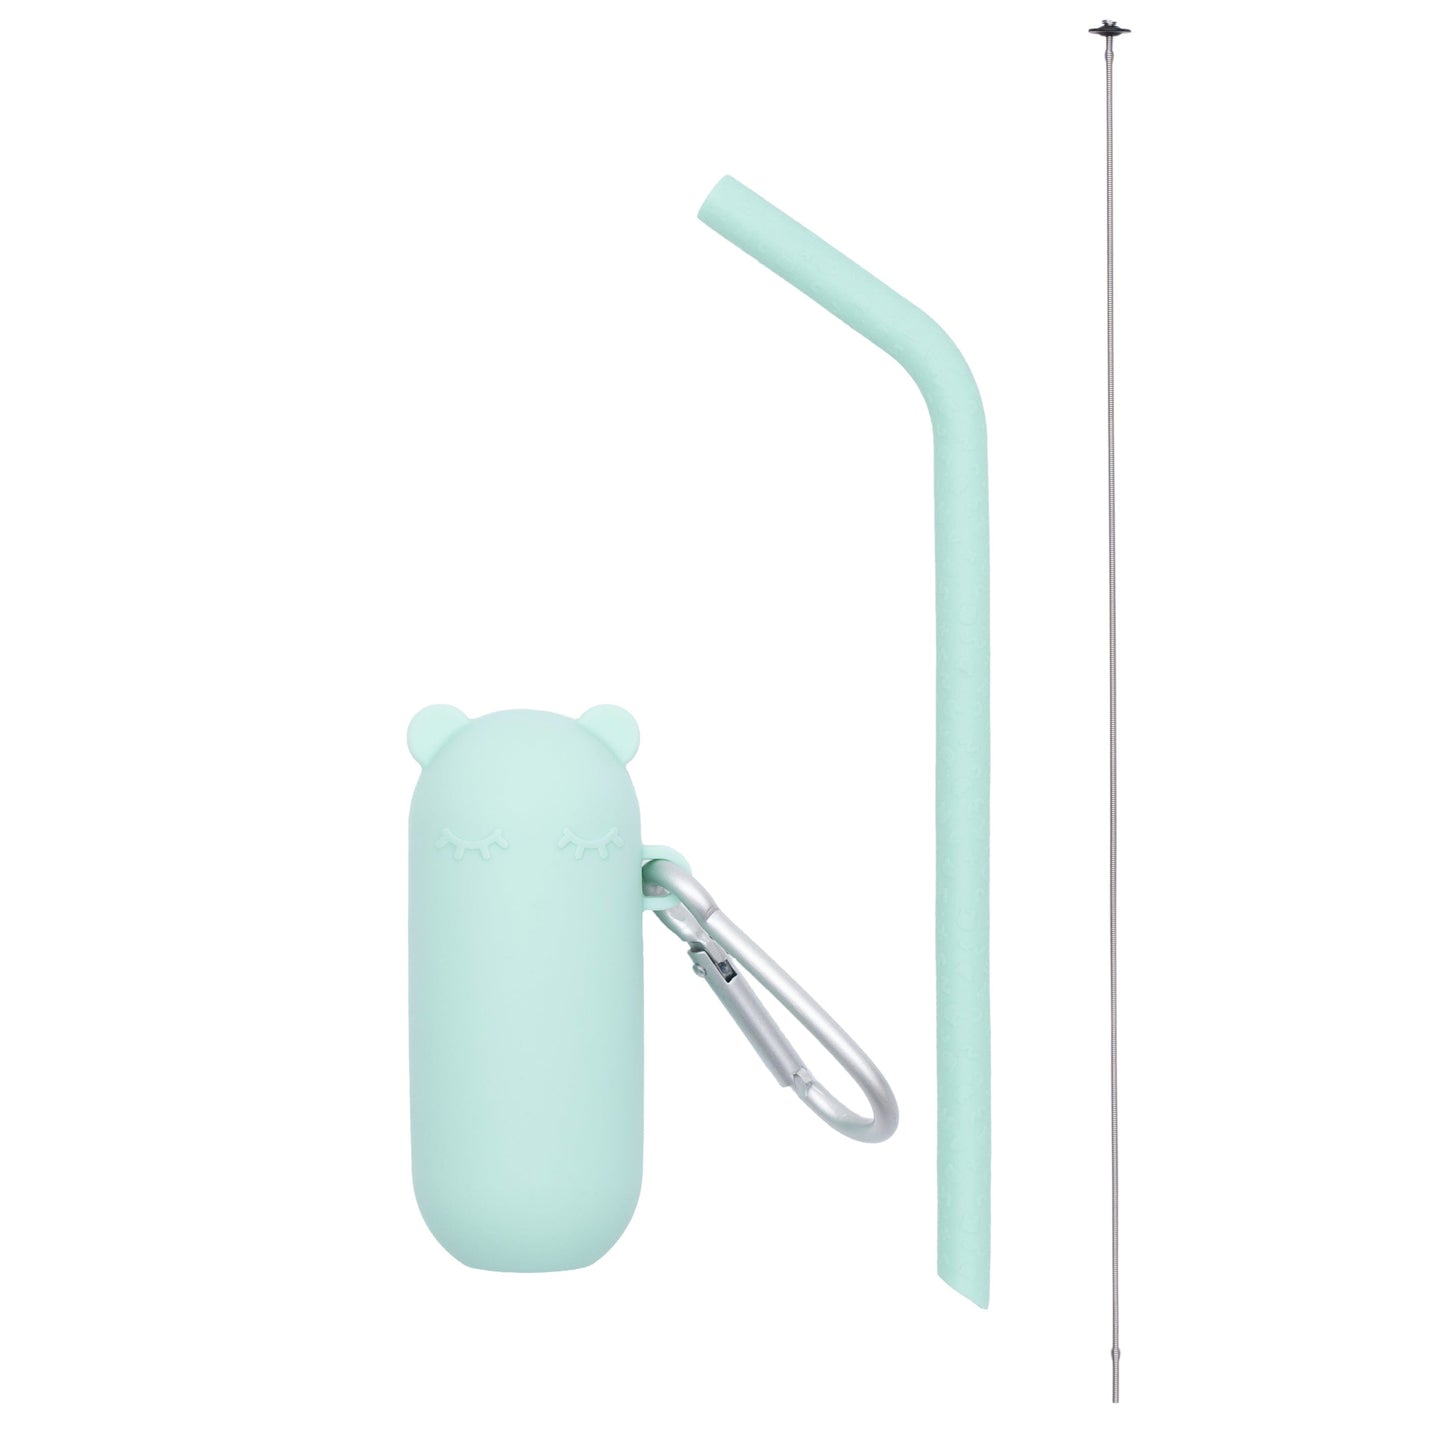 We Might Be Tiny Silicone Keepie + Straw Set We Might Be Tiny Silicone Keepie + Straw Set 